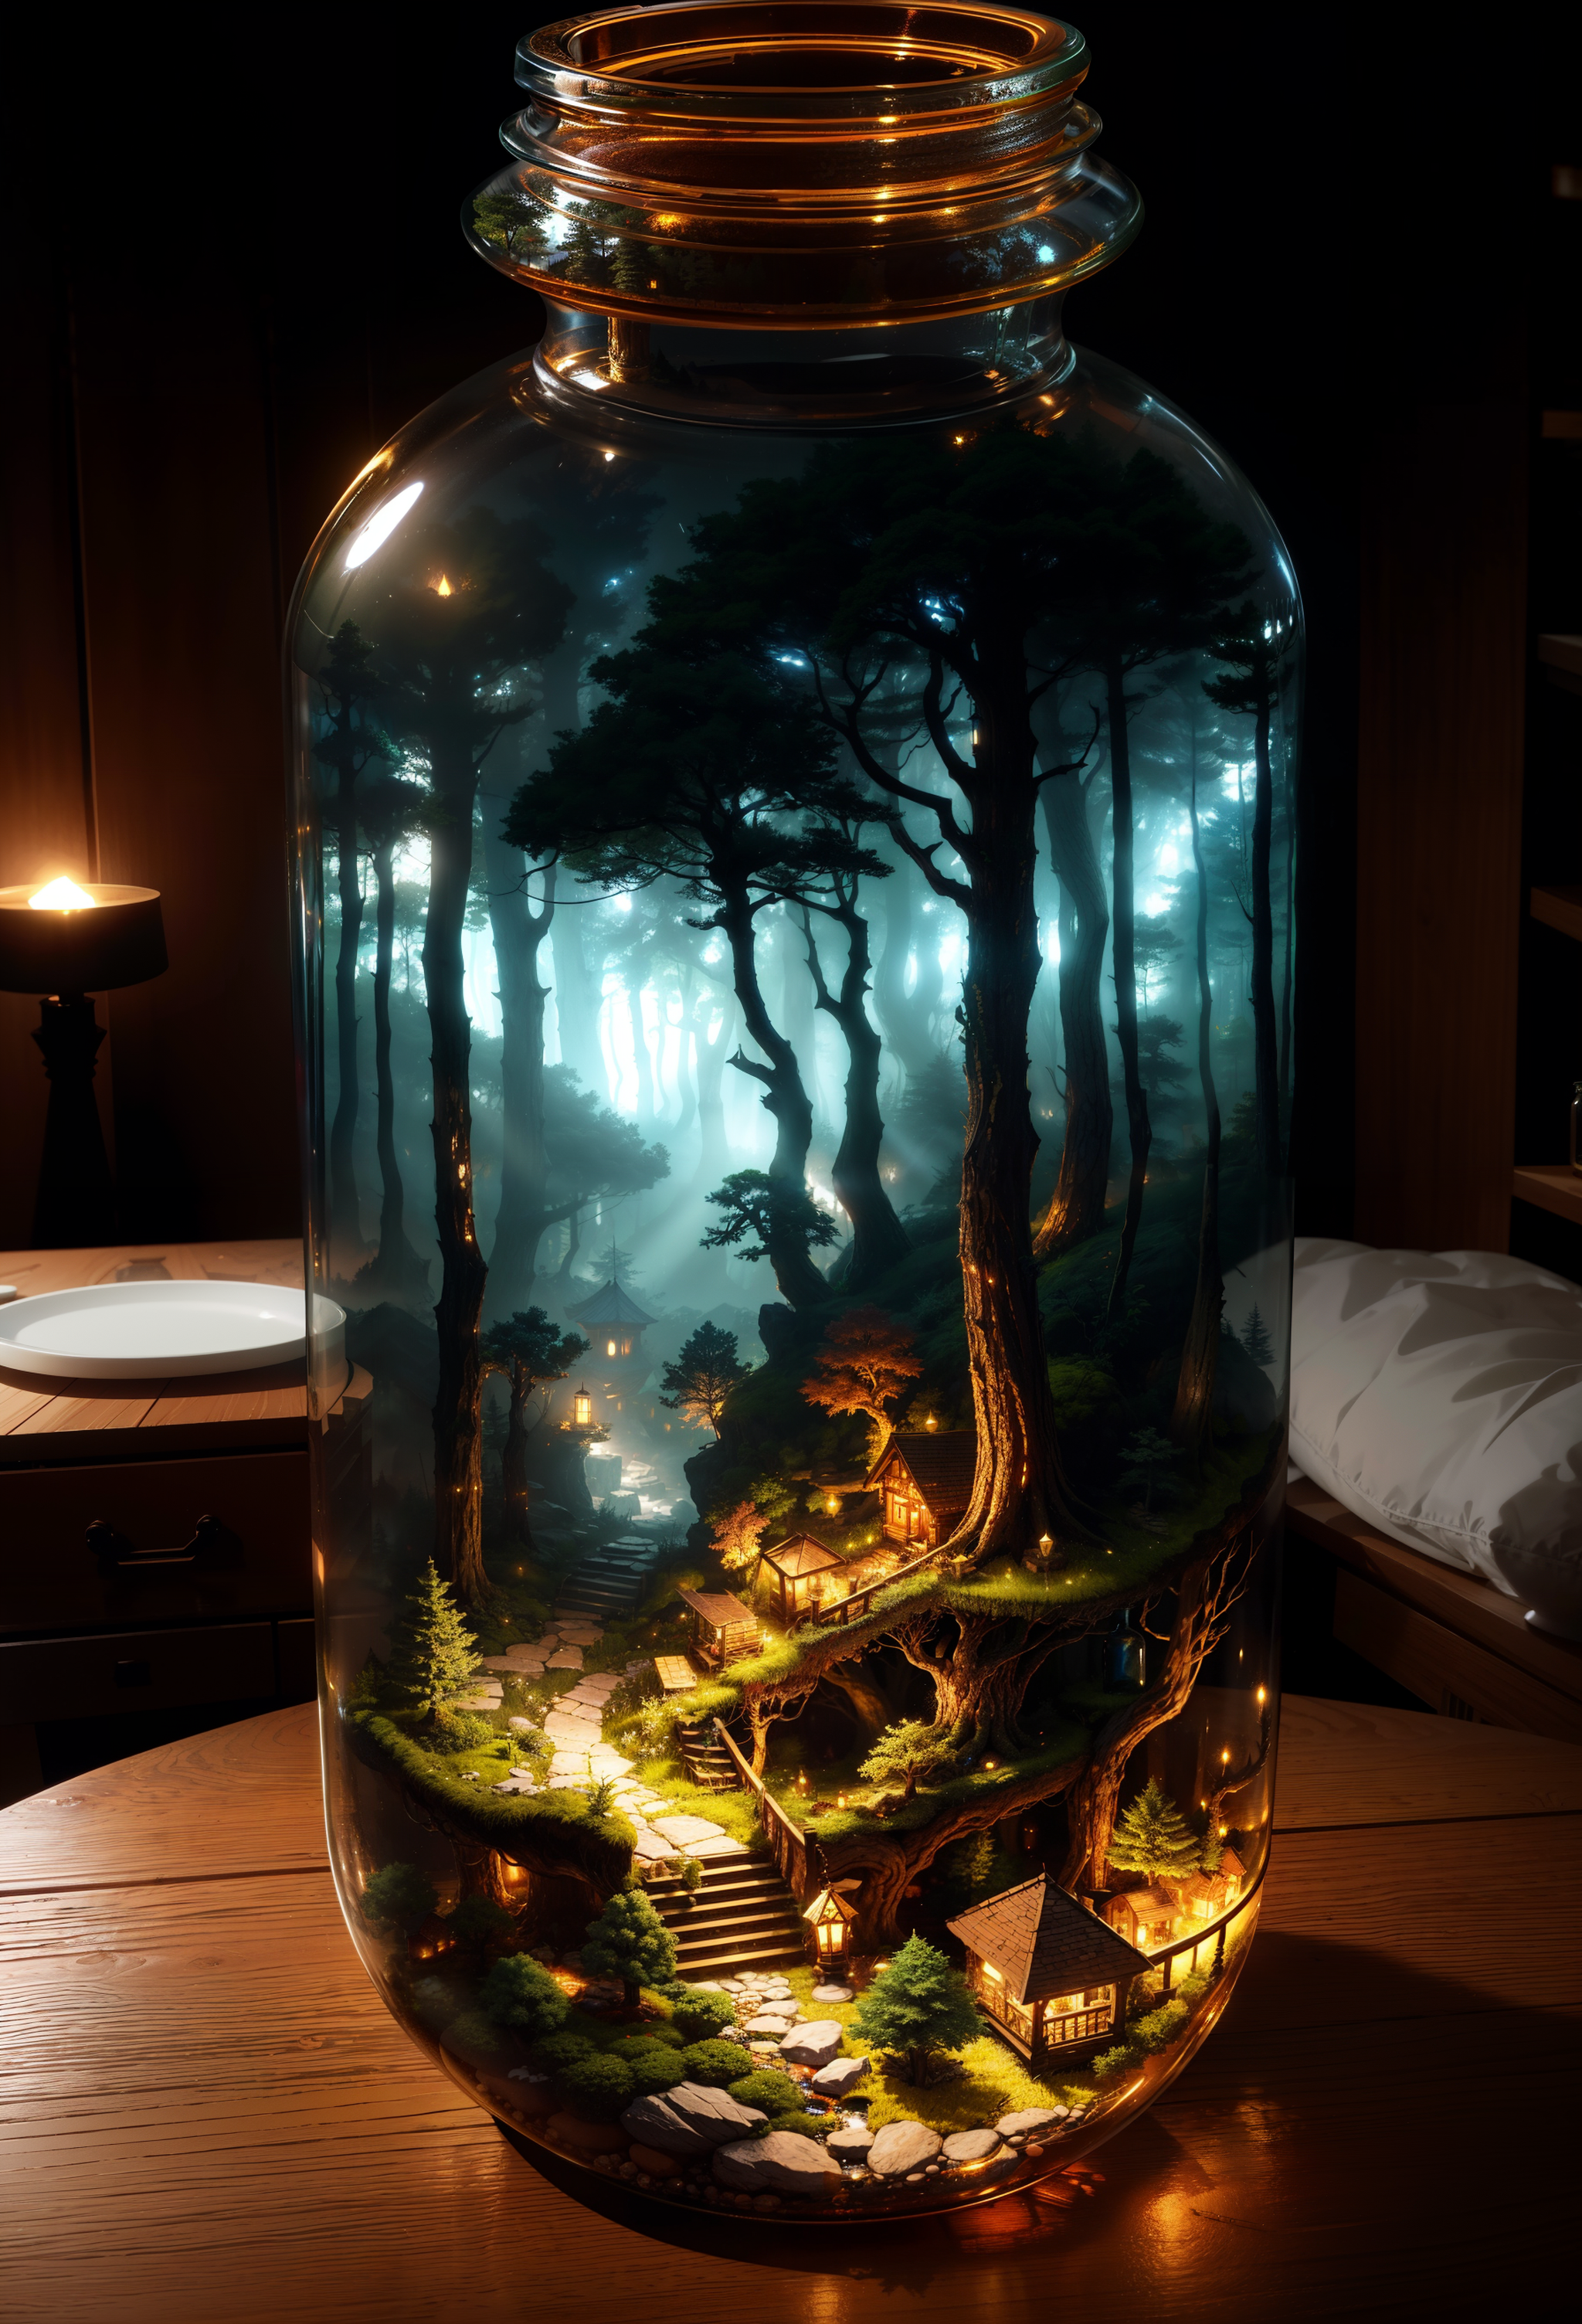 Glass Jar Displaying Miniature Landscape with Trees and Staircase